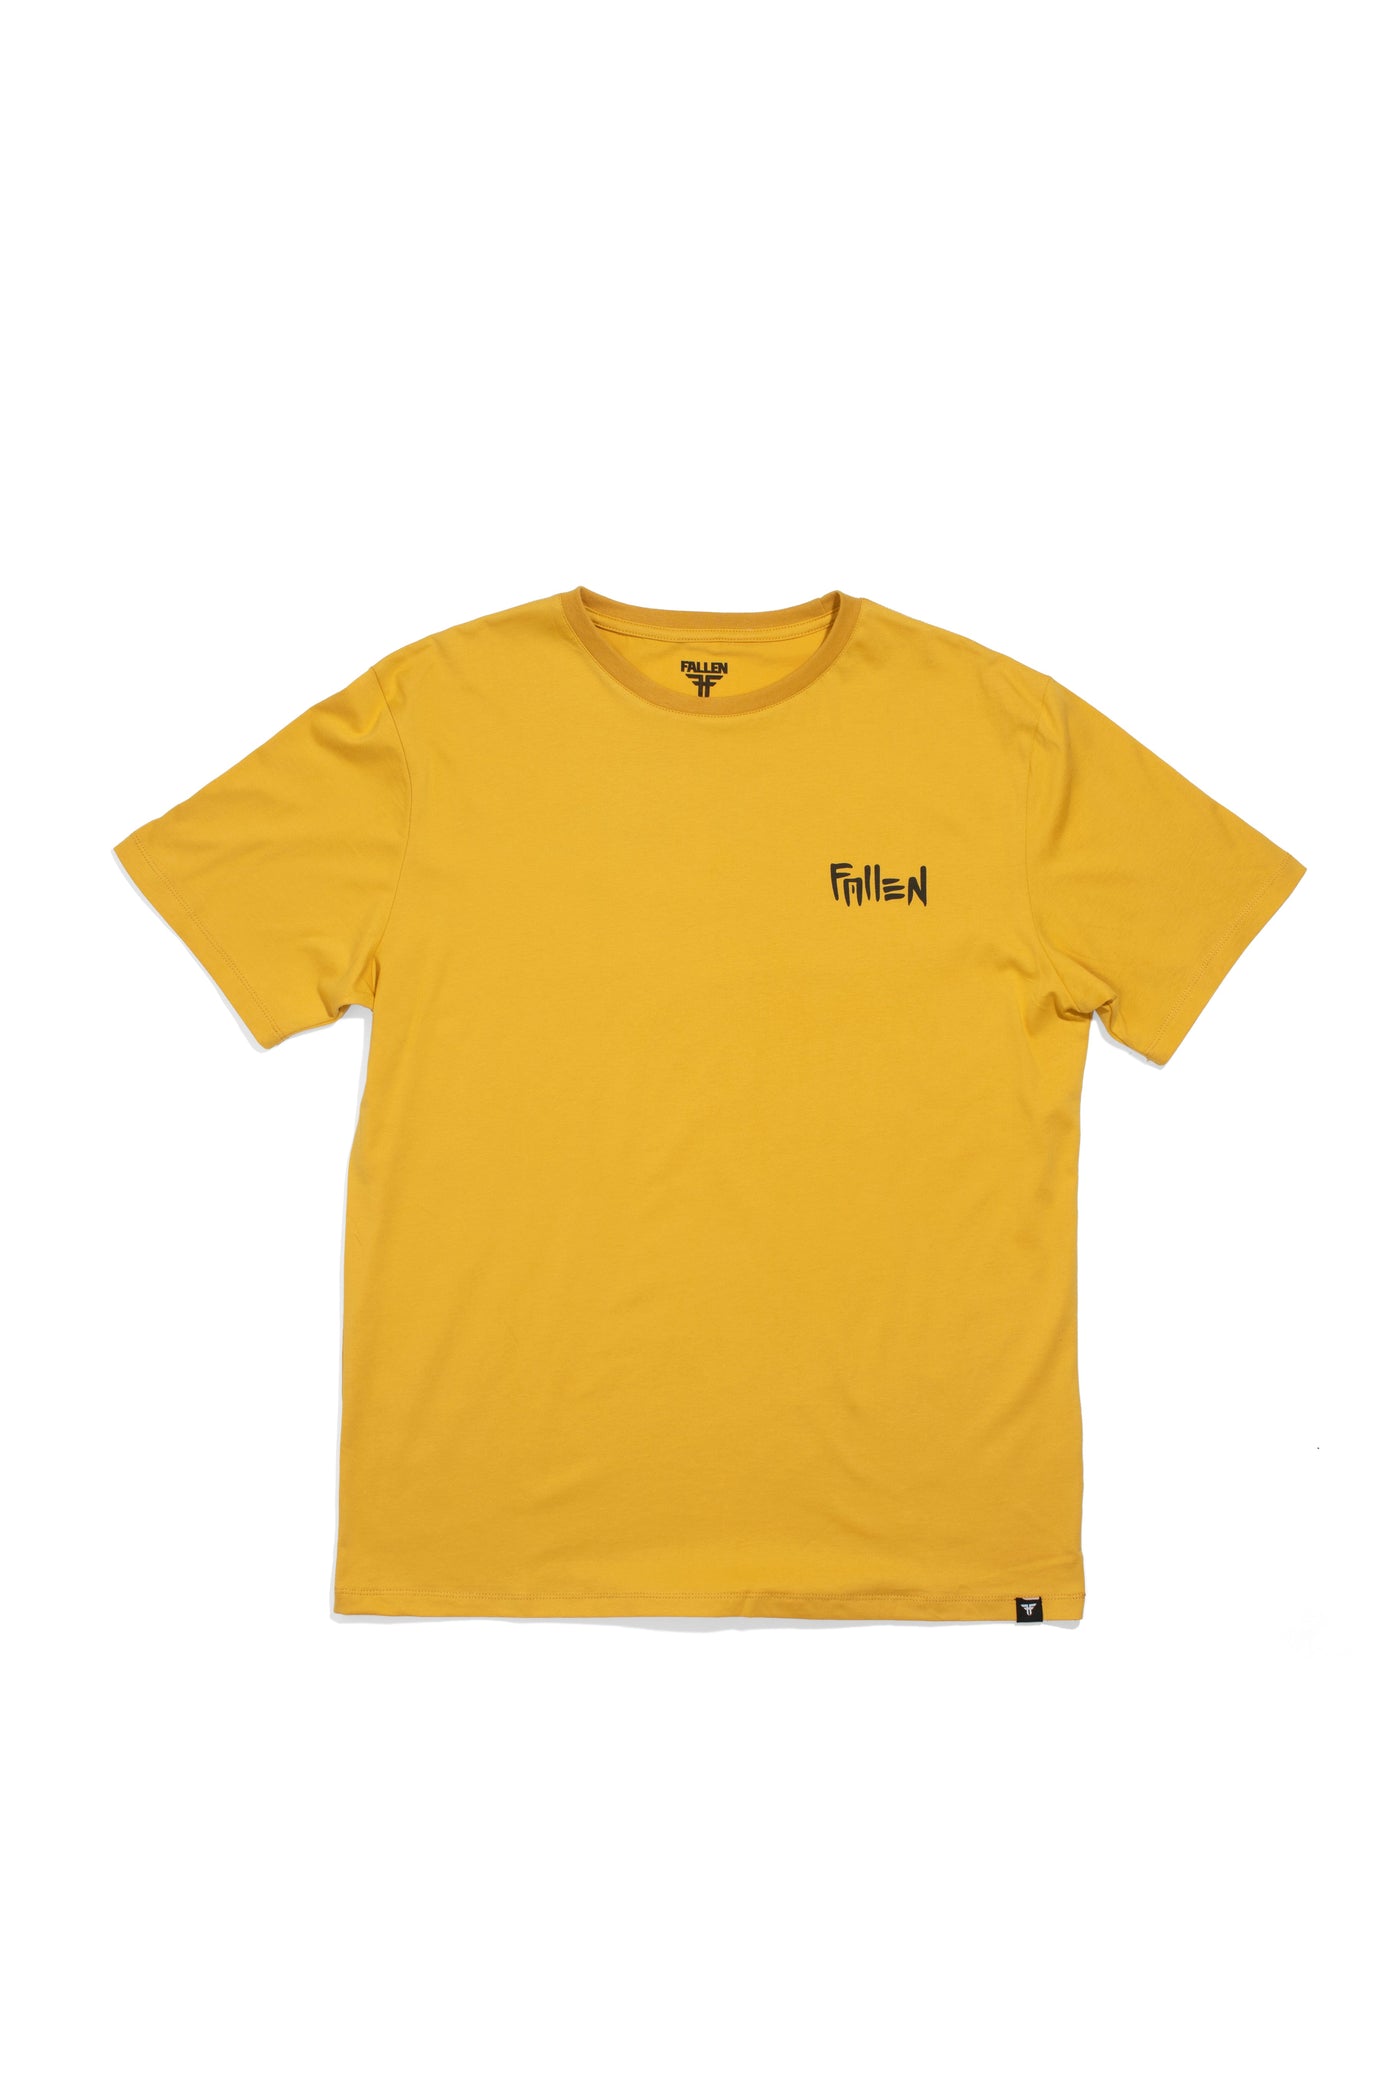 RISE WITH TEE - YELLOW